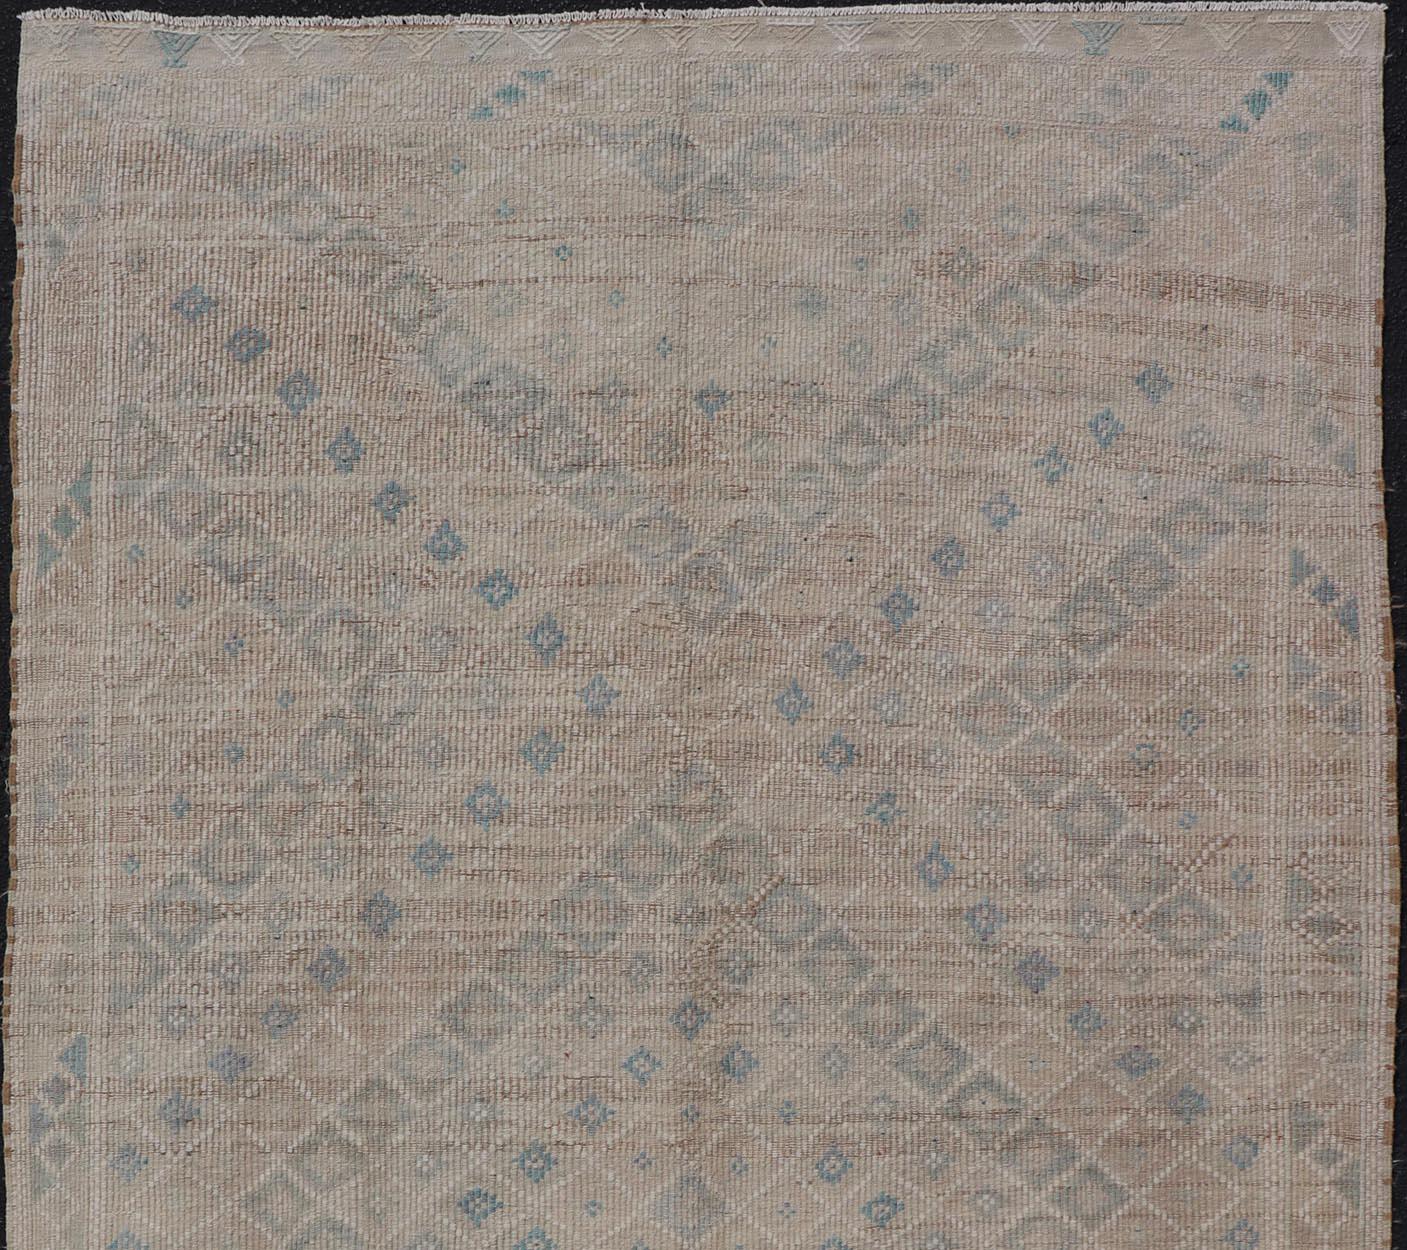 Measures: 6'1 x 10'1 

This hand-woven Kilim features muted shades of taupe, light blue, light green, camel, and small accent details in cream. The all-over design displays a geometric diamond design, each lightly stylized with an accent color